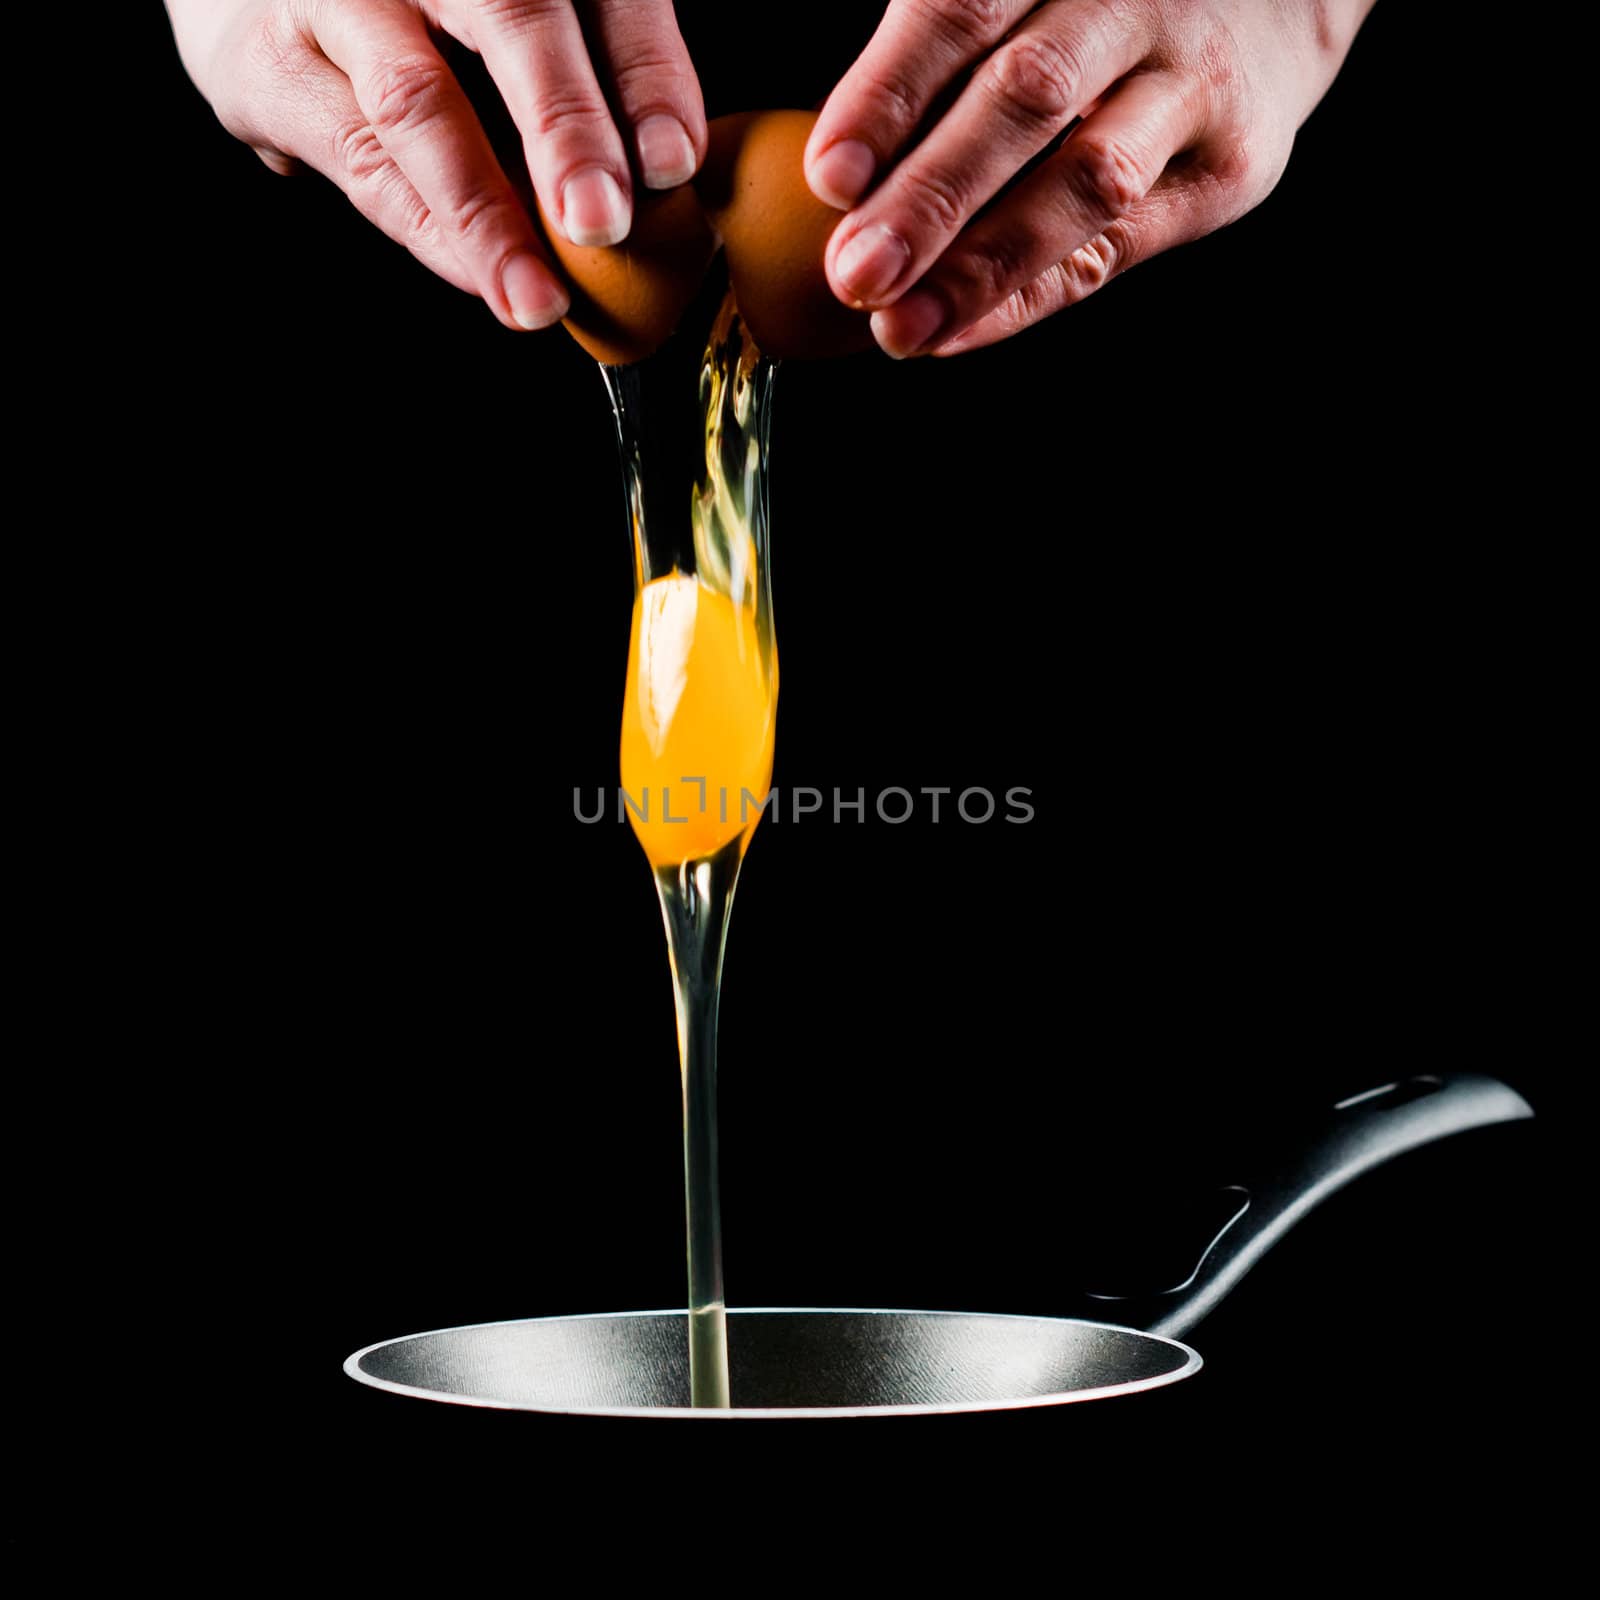 Yolk dropping in pan from cracked raw egg, divided by woman hands